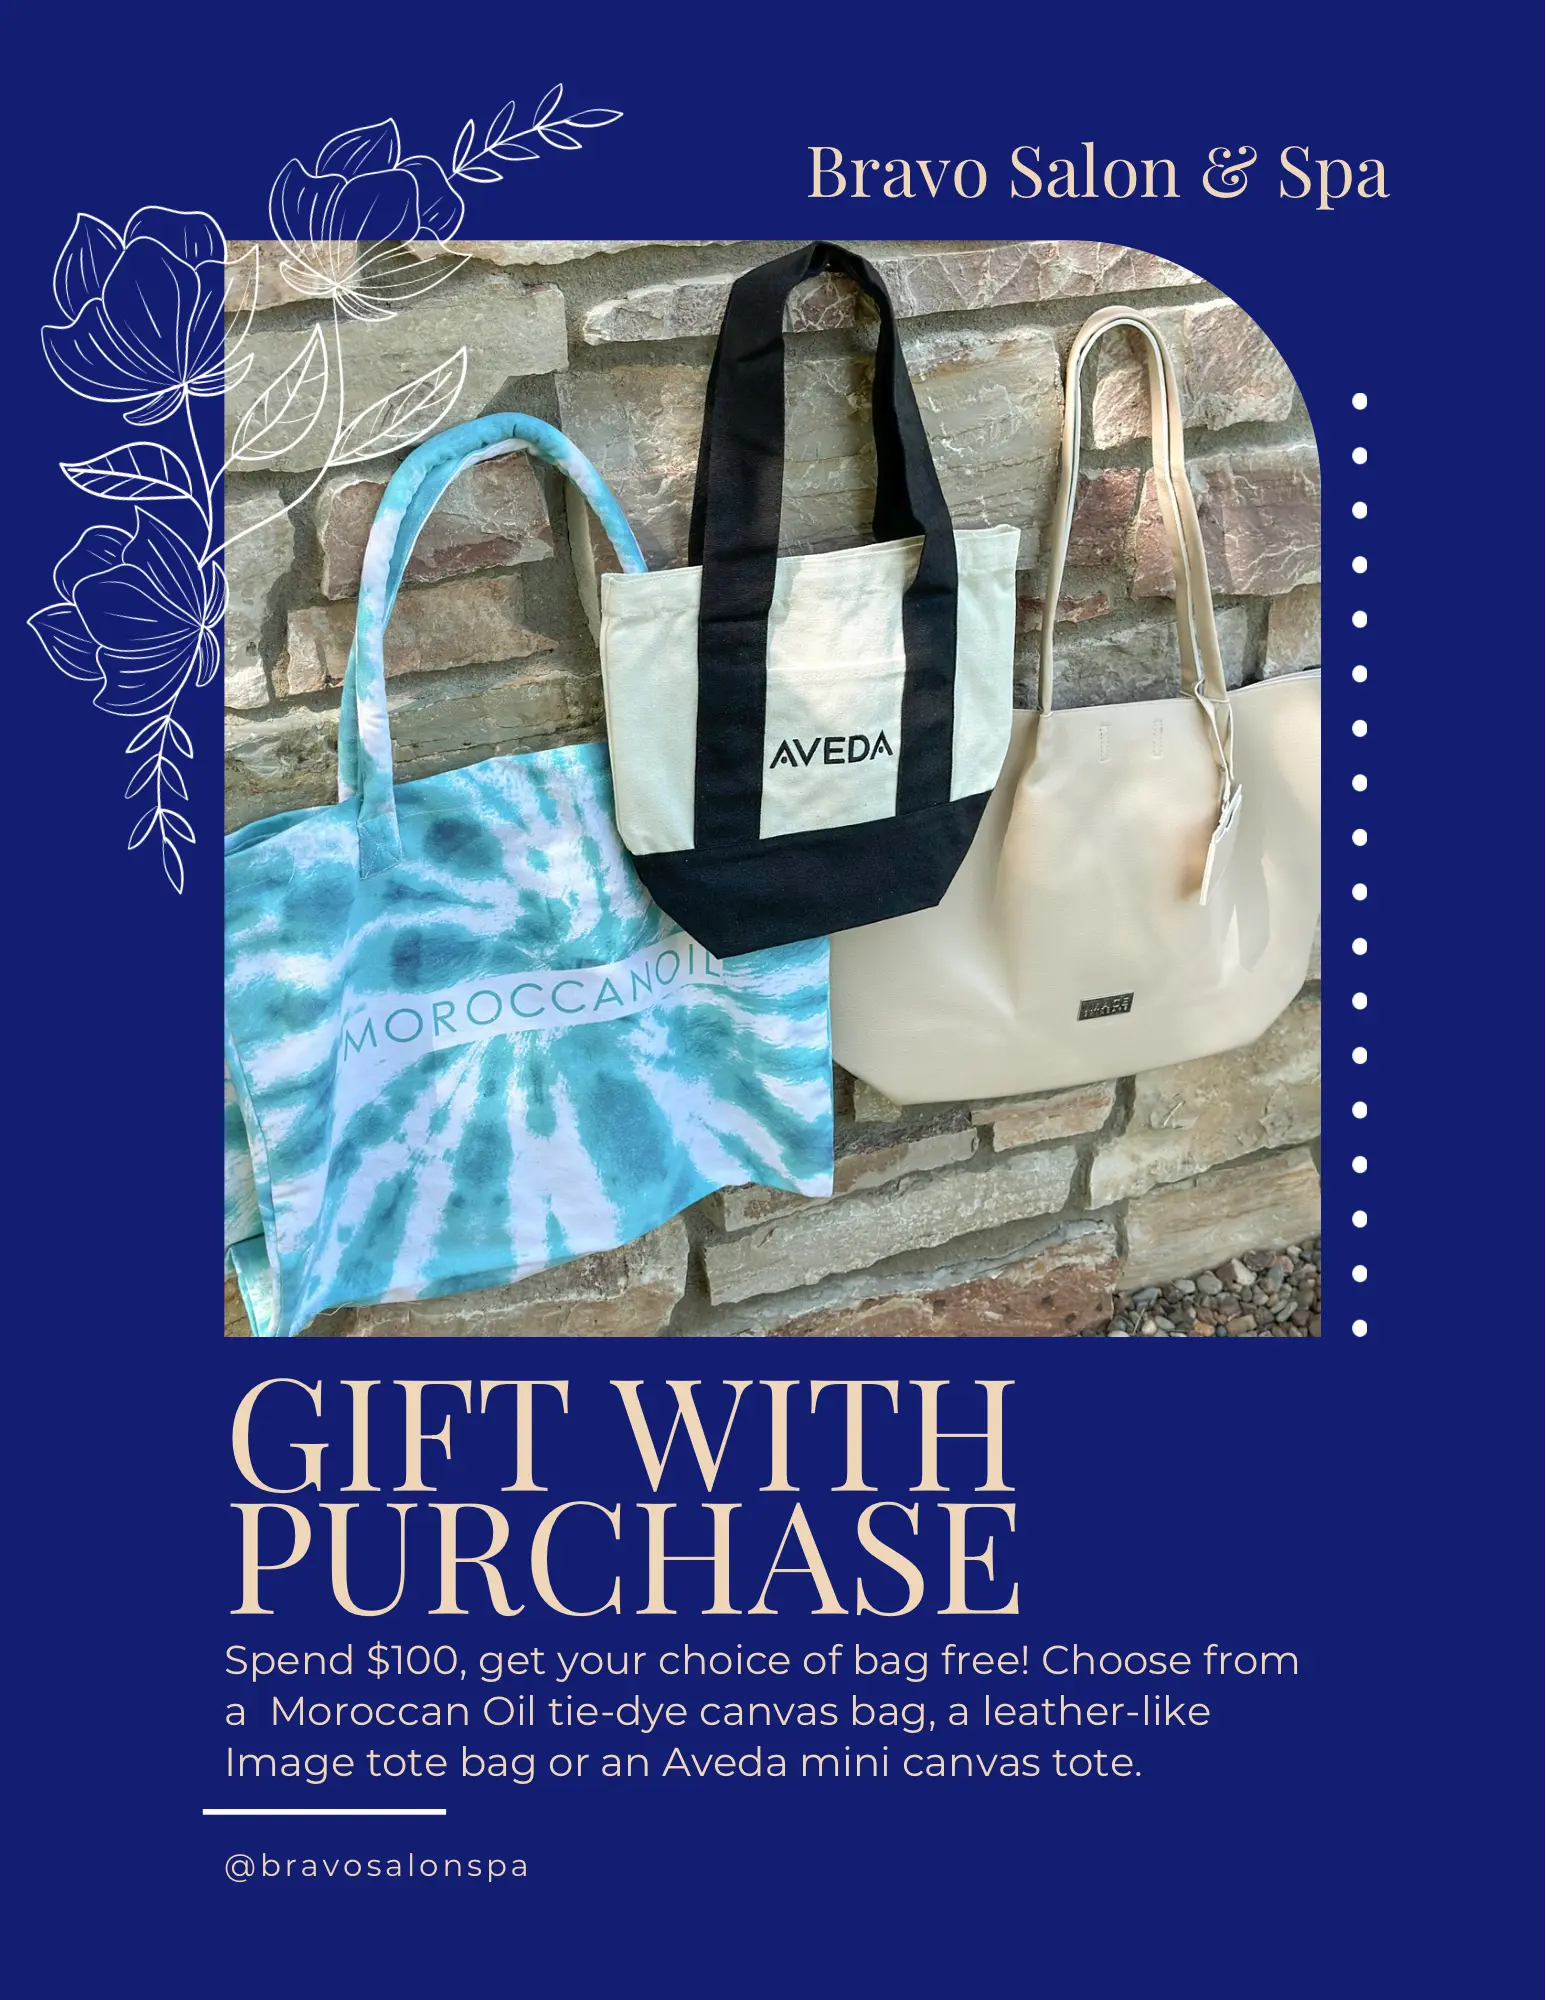 Spend $100 - Get your choice of a bag FREE!